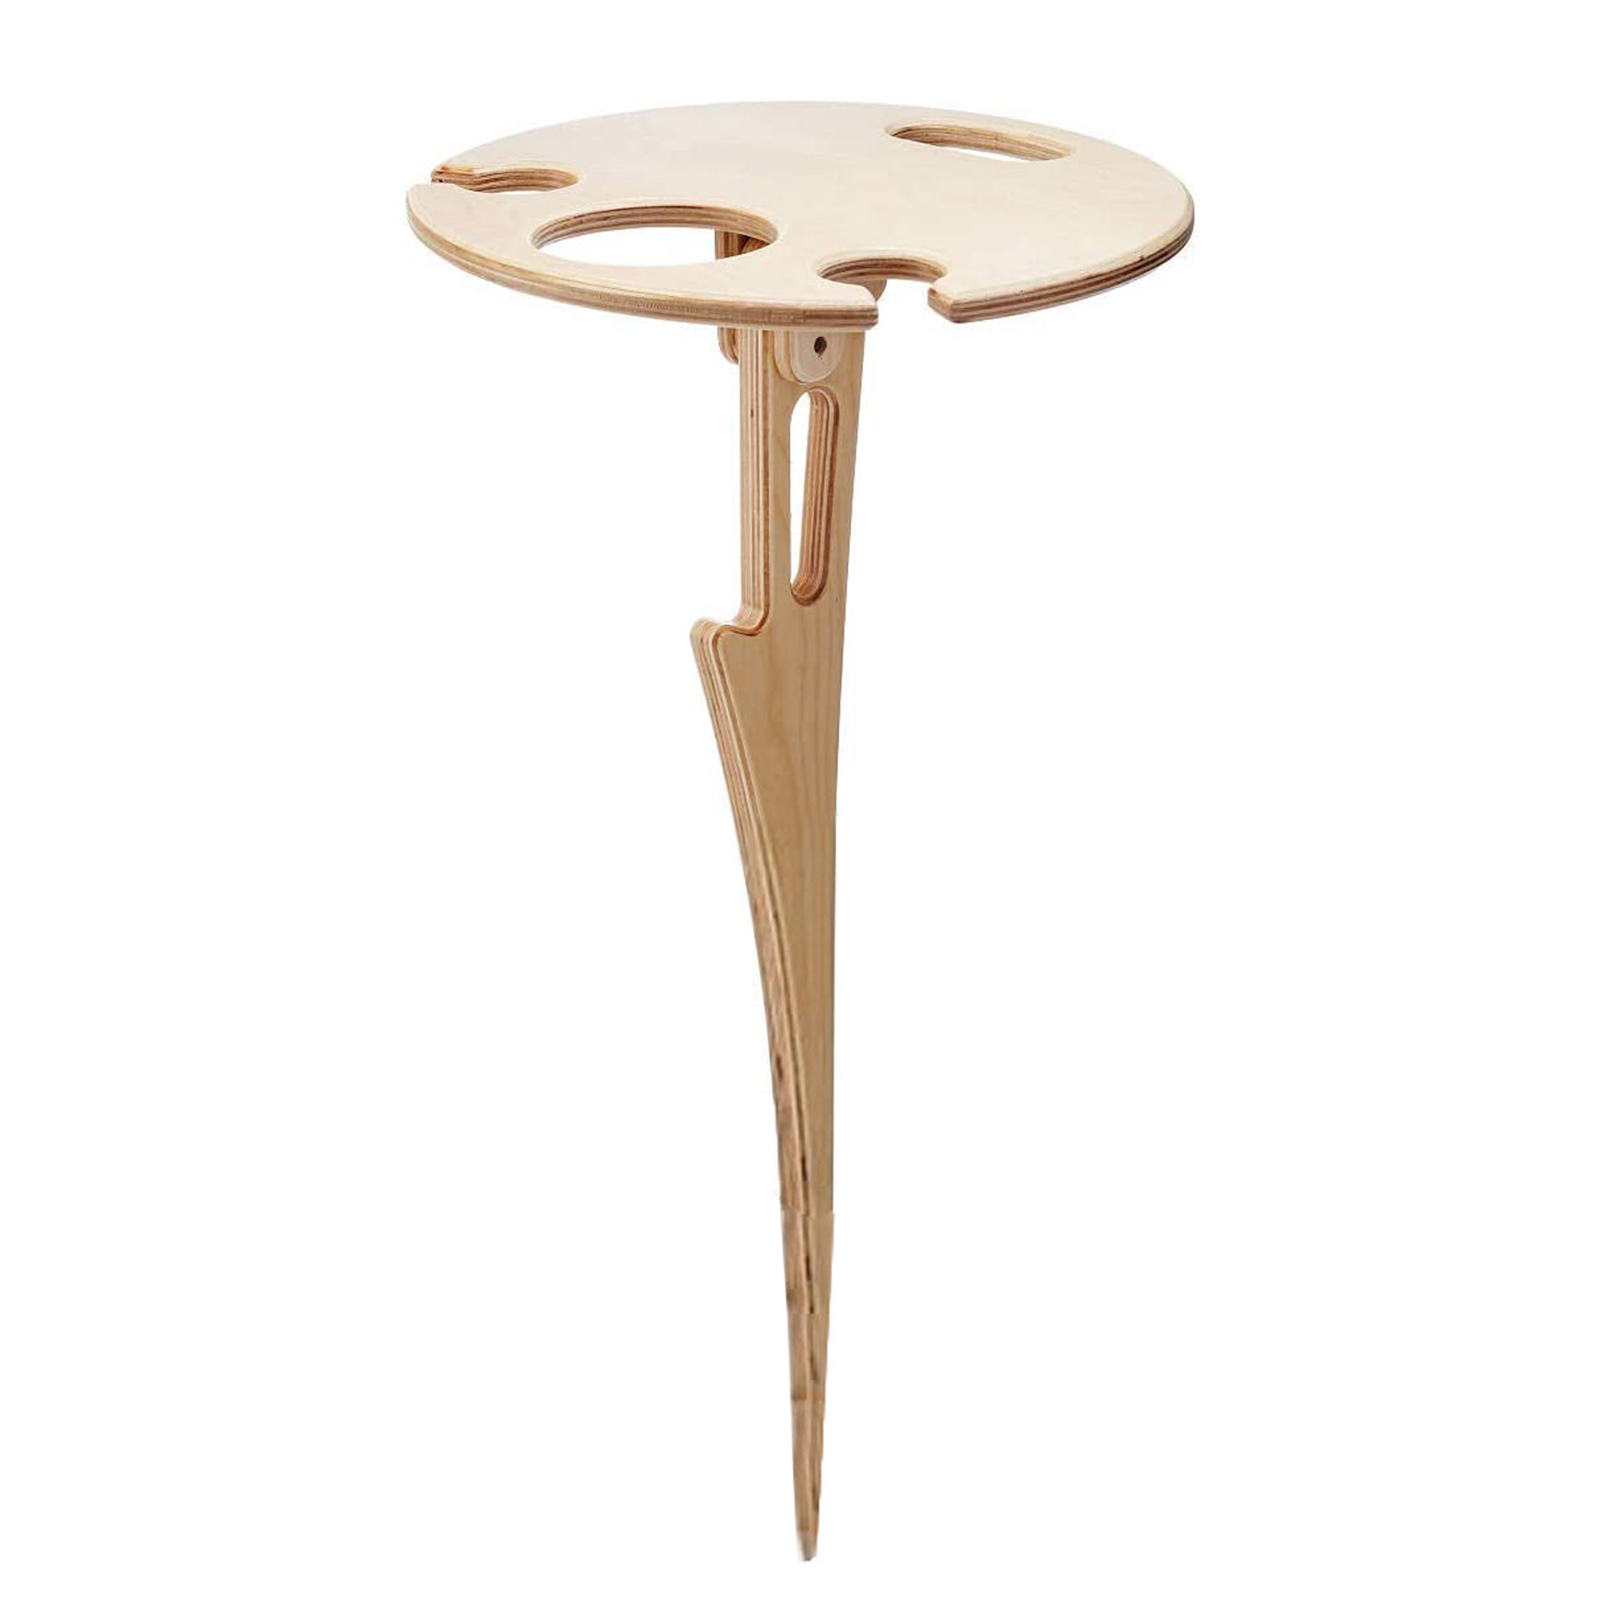 (Beige) Outdoor Wine Table Portable Picnic Table Wine Glass Holder Folding Table - image 1 of 11